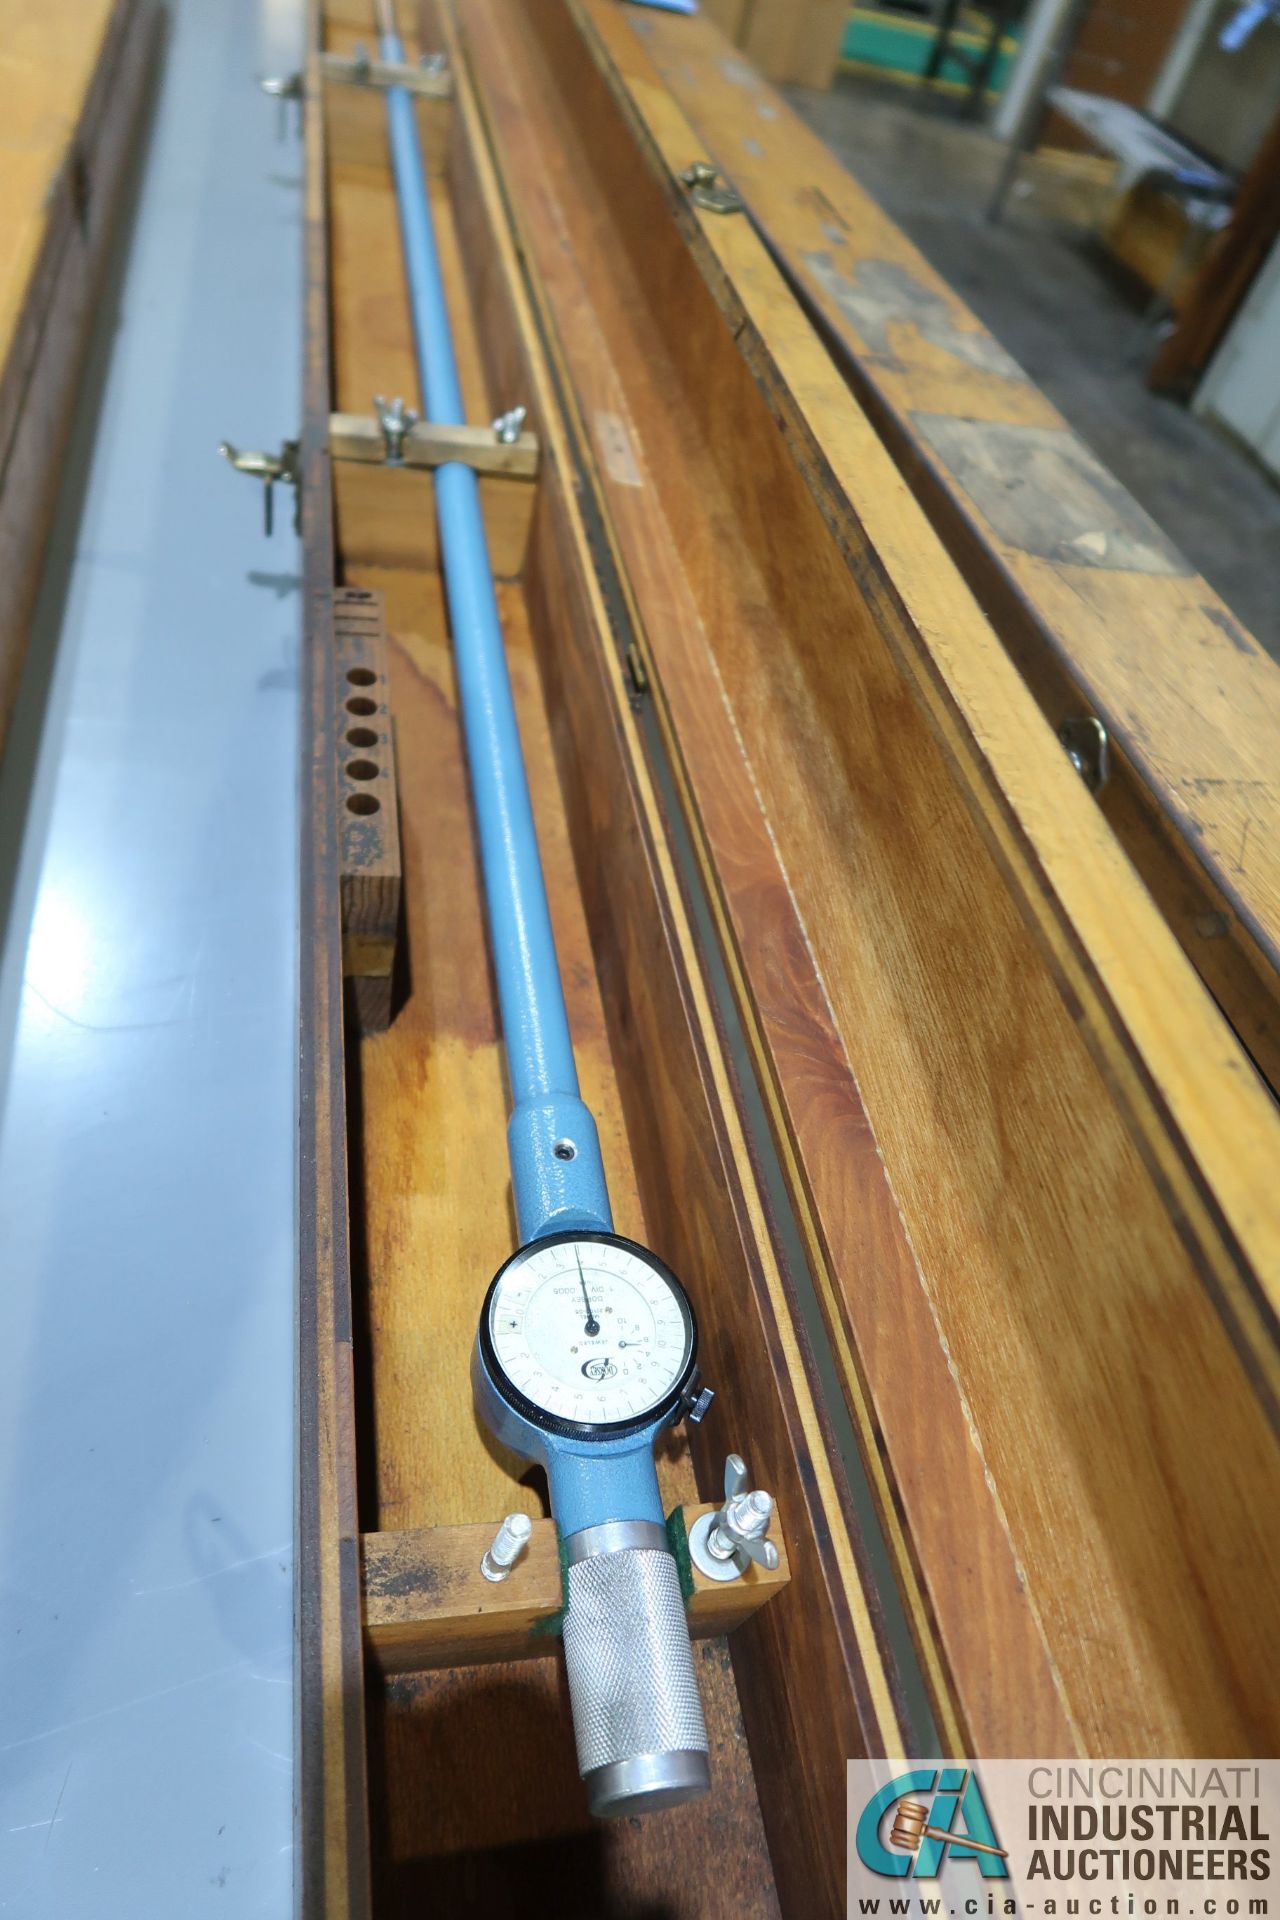 58" LONG STANDARD GAGE CO. DIAL BORE GAGE WITH STANDARD NO. 5 DIAL GAGE